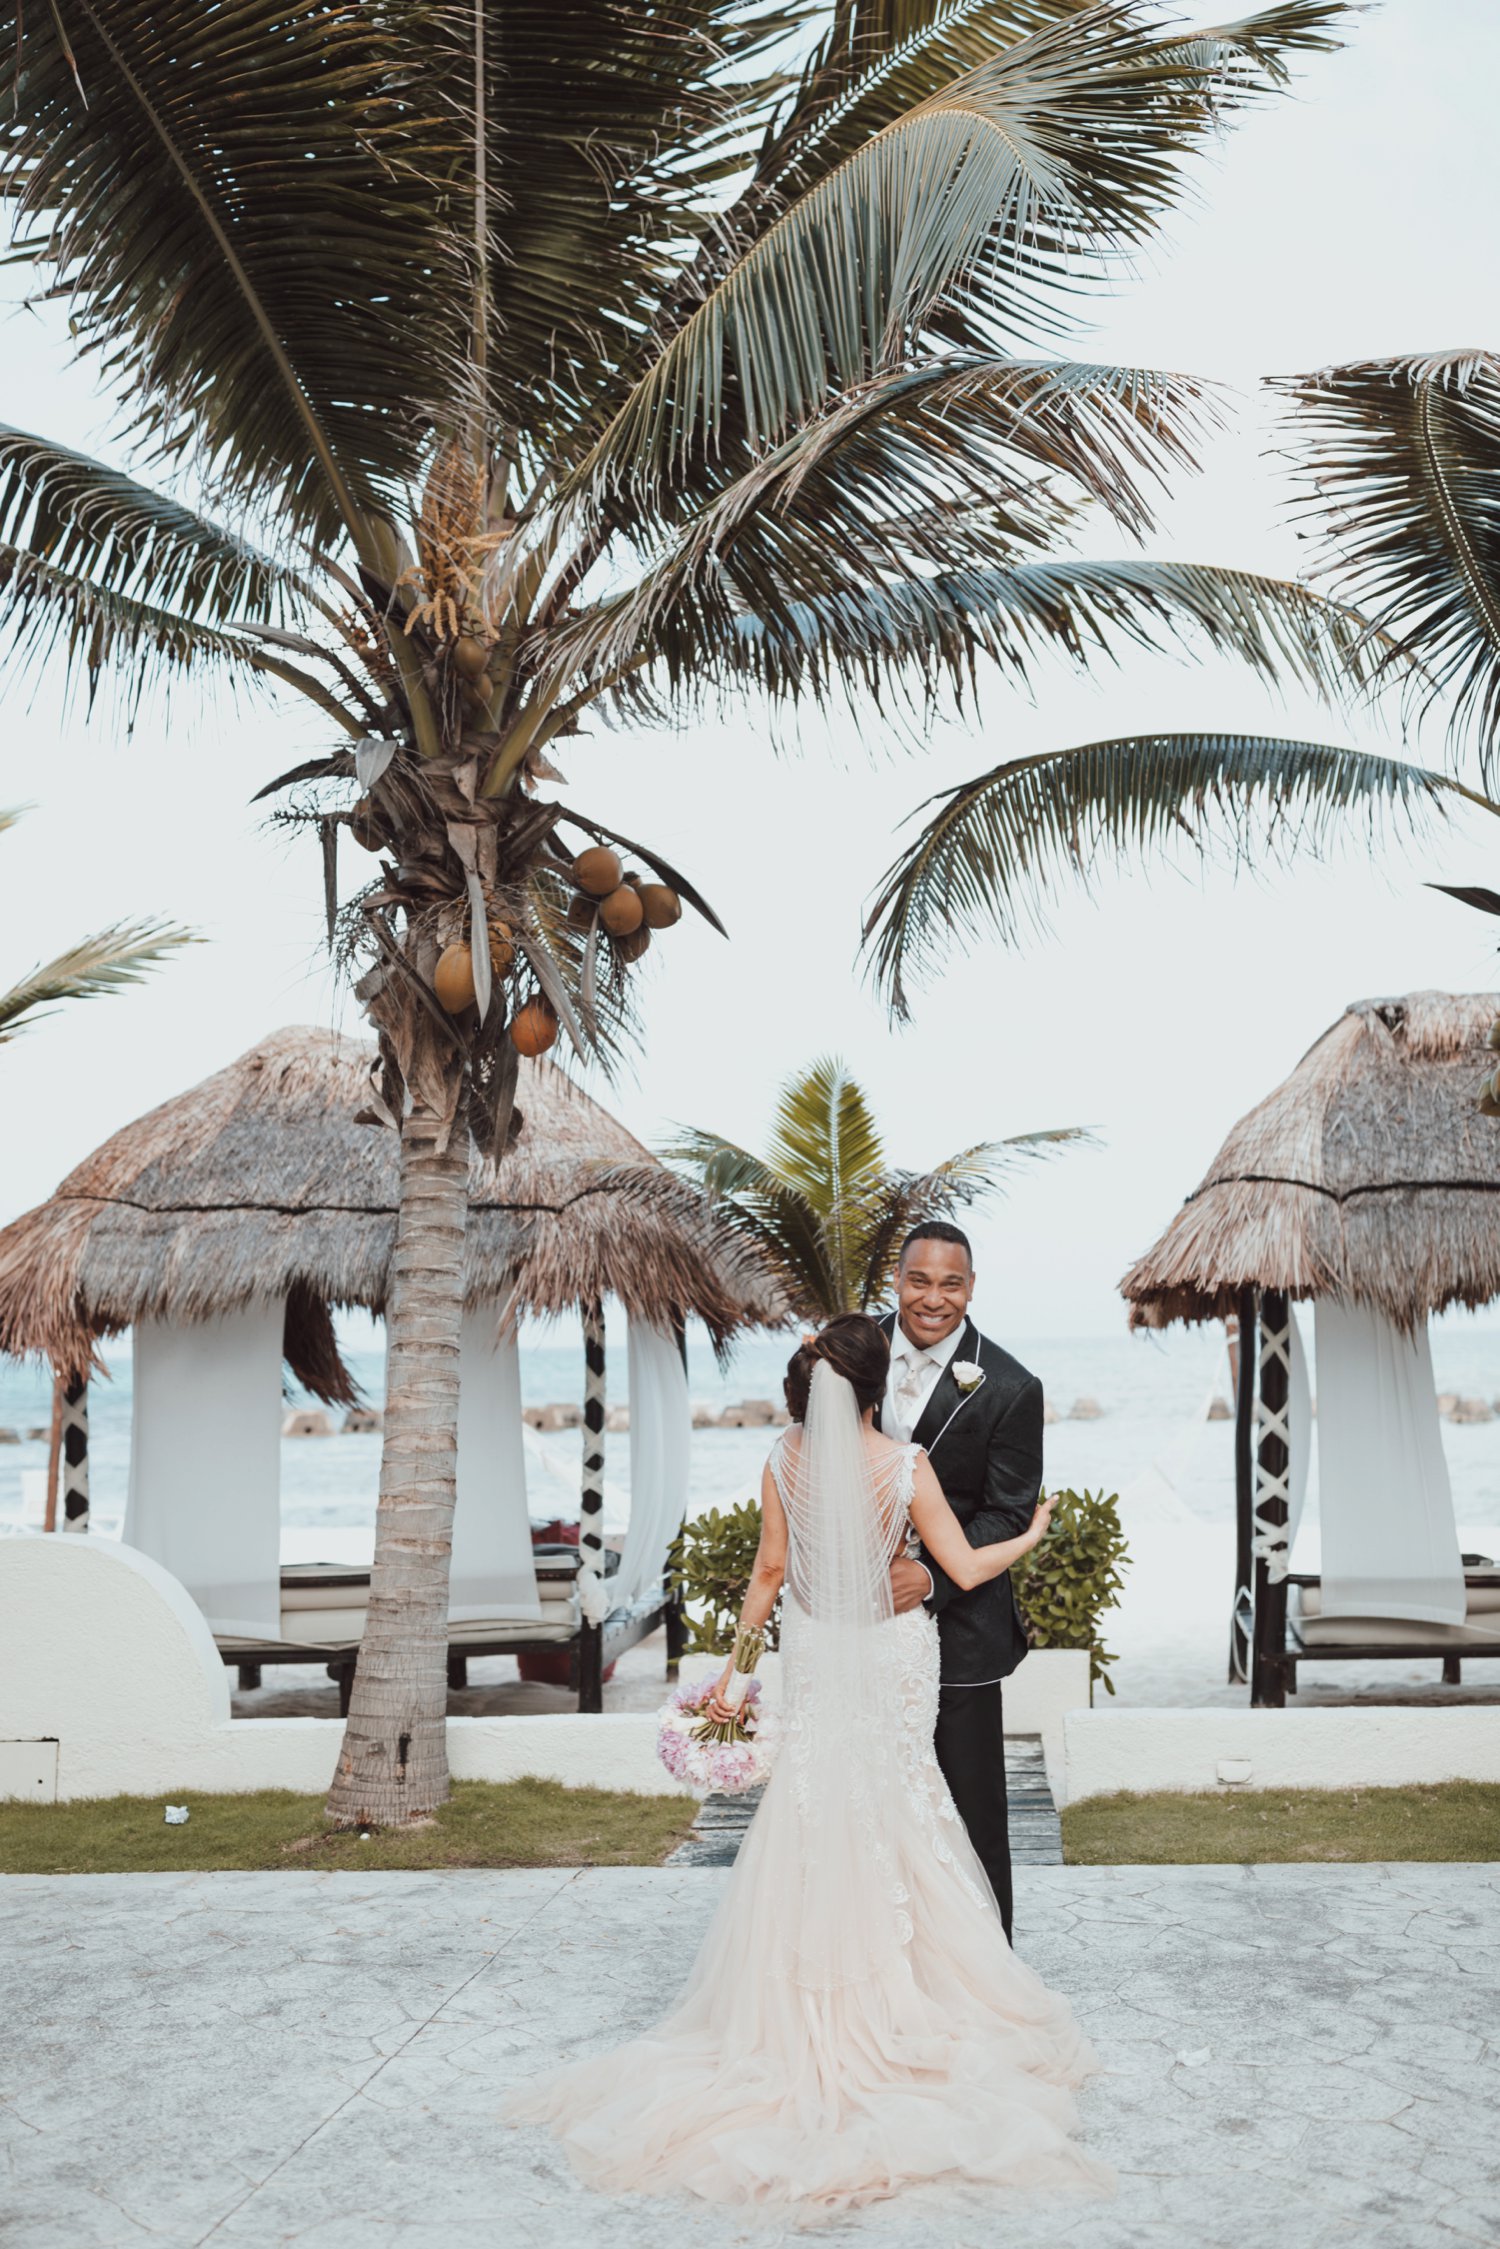  images by feliciathephotographer.com | destination wedding photographer | el dorado riviera maya | glamorous | beachside | resort | couple portraits | bride and groom | beaded draped back gown | allure | palm trees | tropical | cabanas | the black tux | white and pink bouquet | 